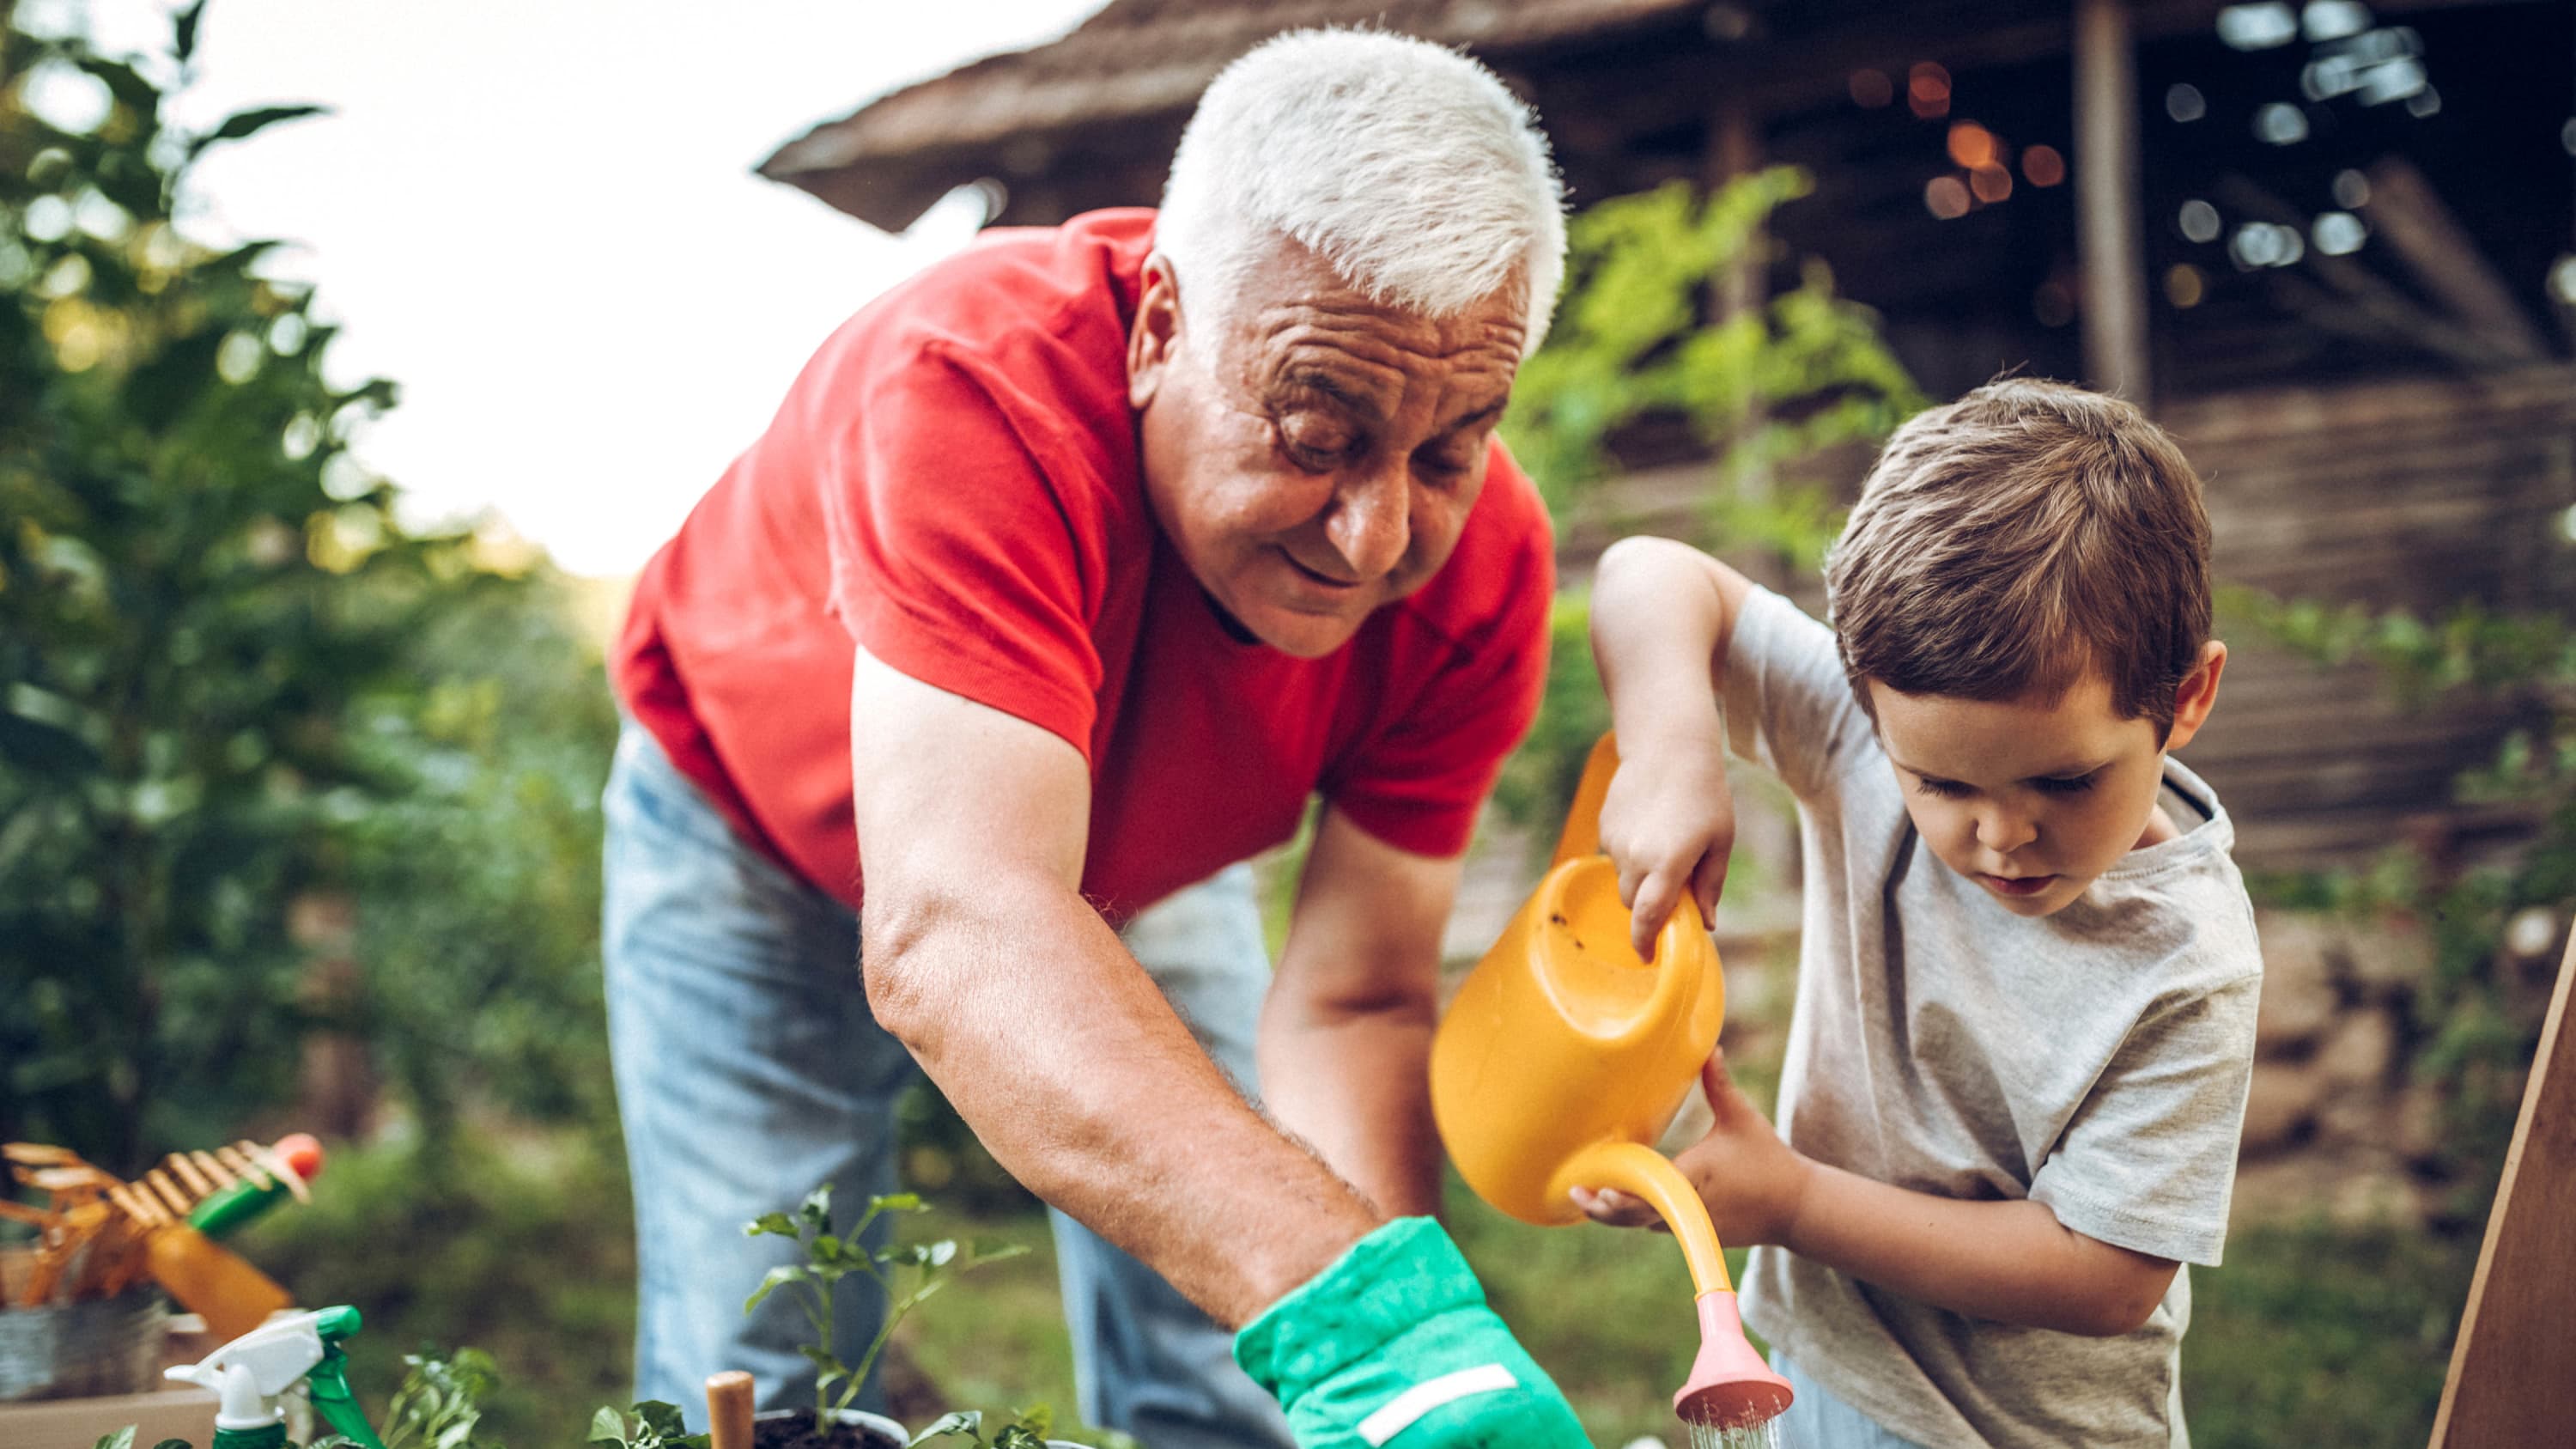 Grandfather with a VAD tends the garden with his grandson.